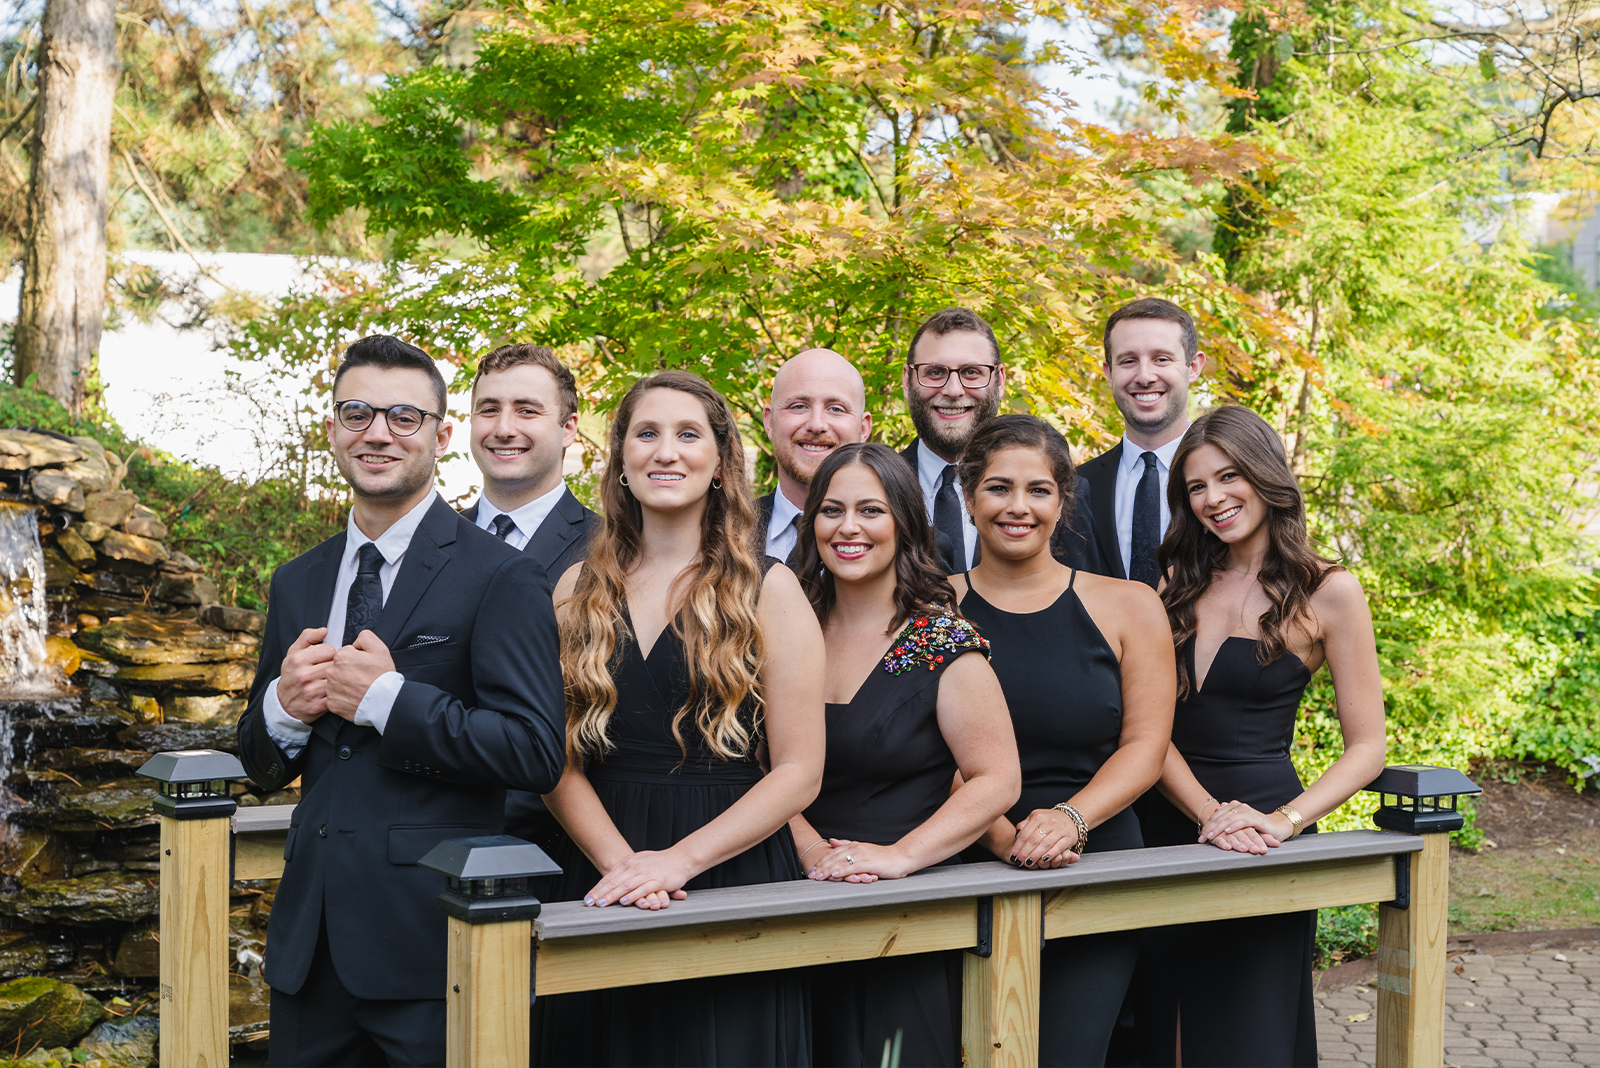 Bridesmaids and groomsmen, bridal party portrait, bridge, nature, green, trees, classy wedding ceremony at Landerhaven, Mayfield Heights OH